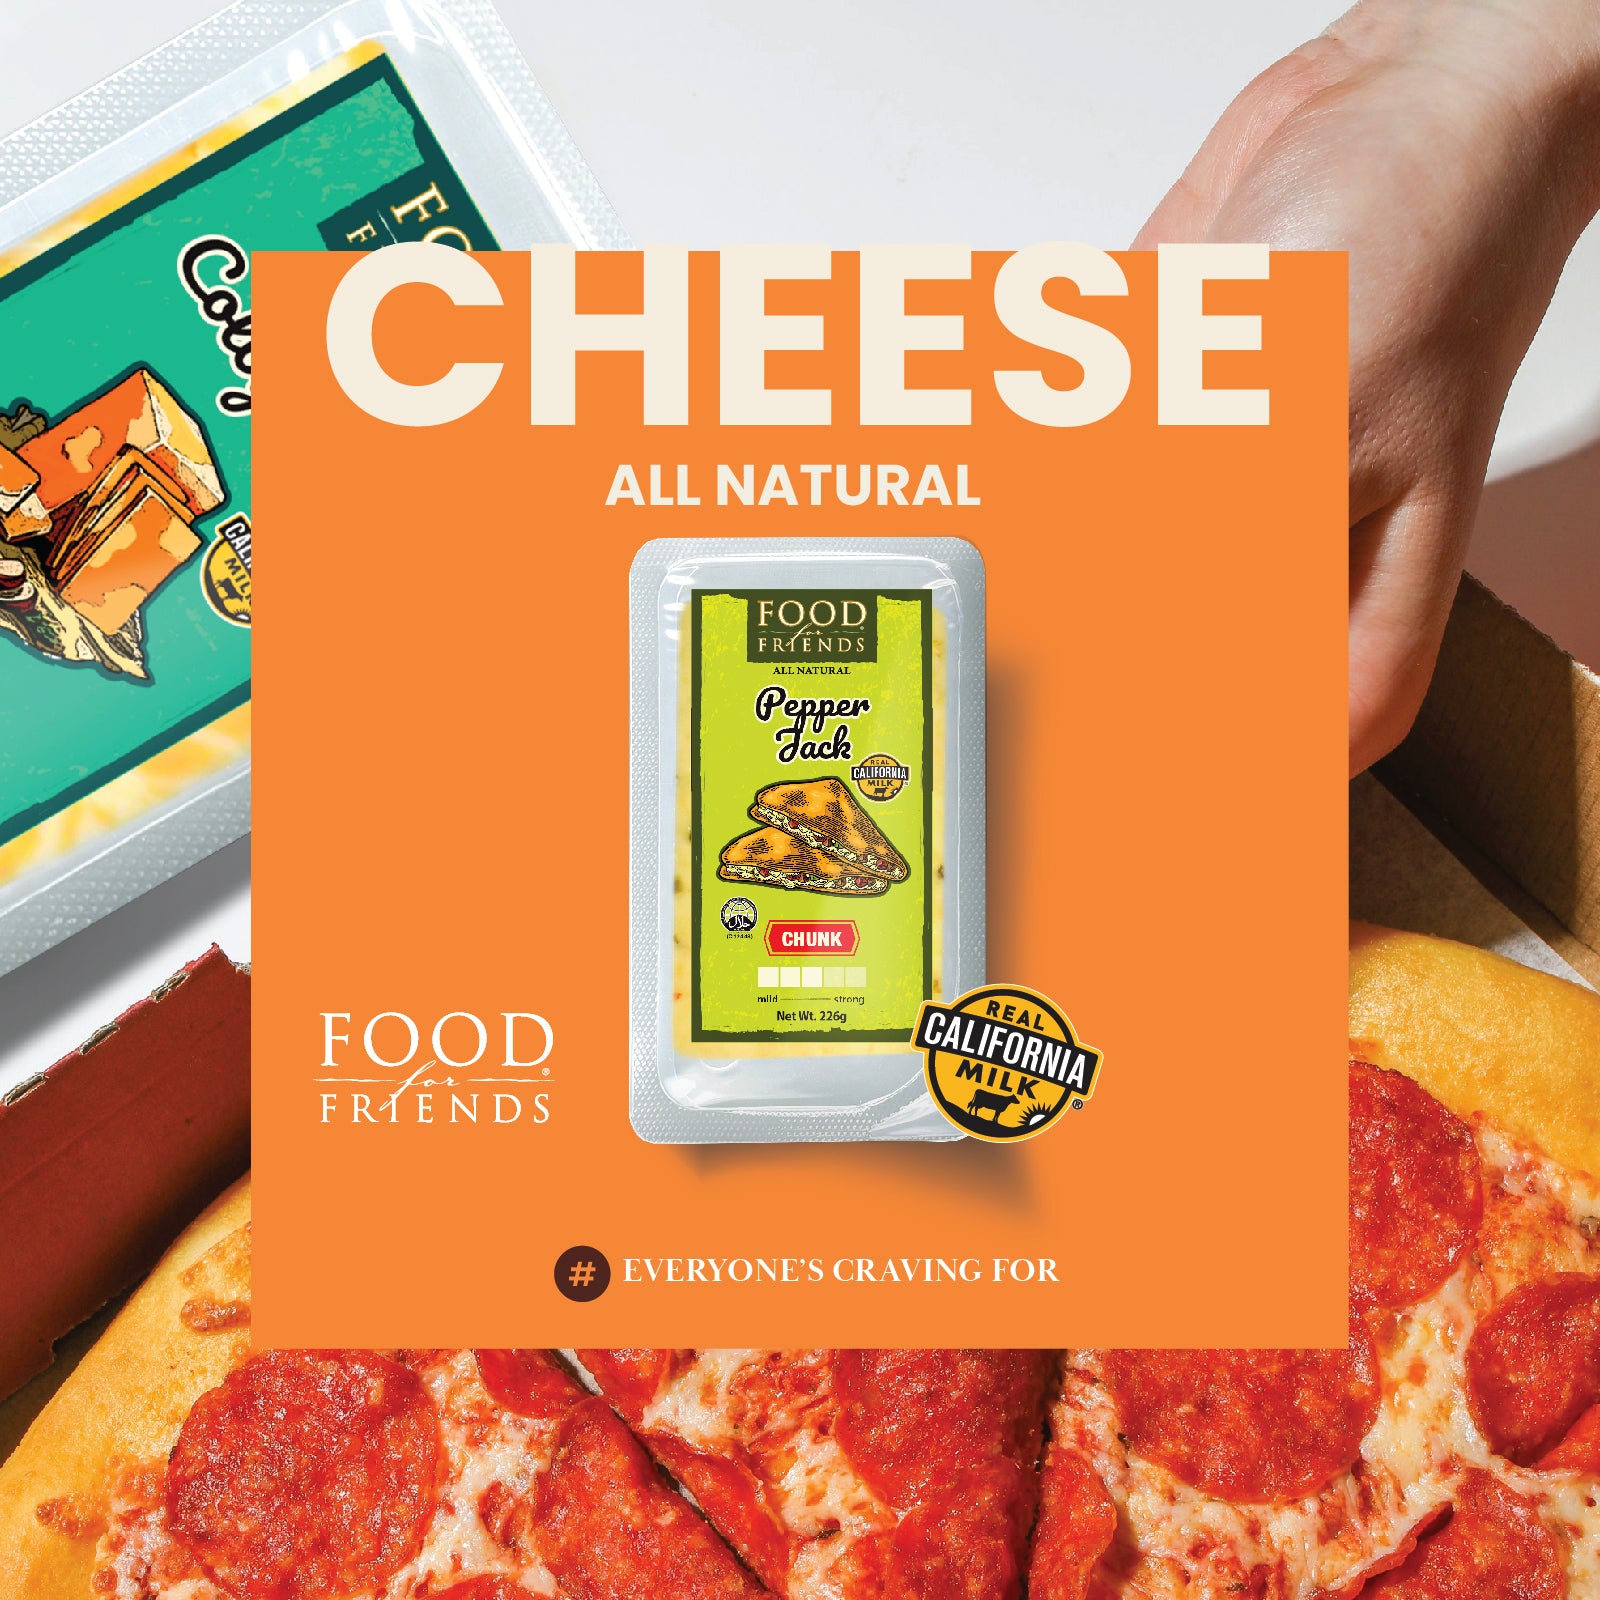 Food For Friends Cheese - Chunk 8Oz